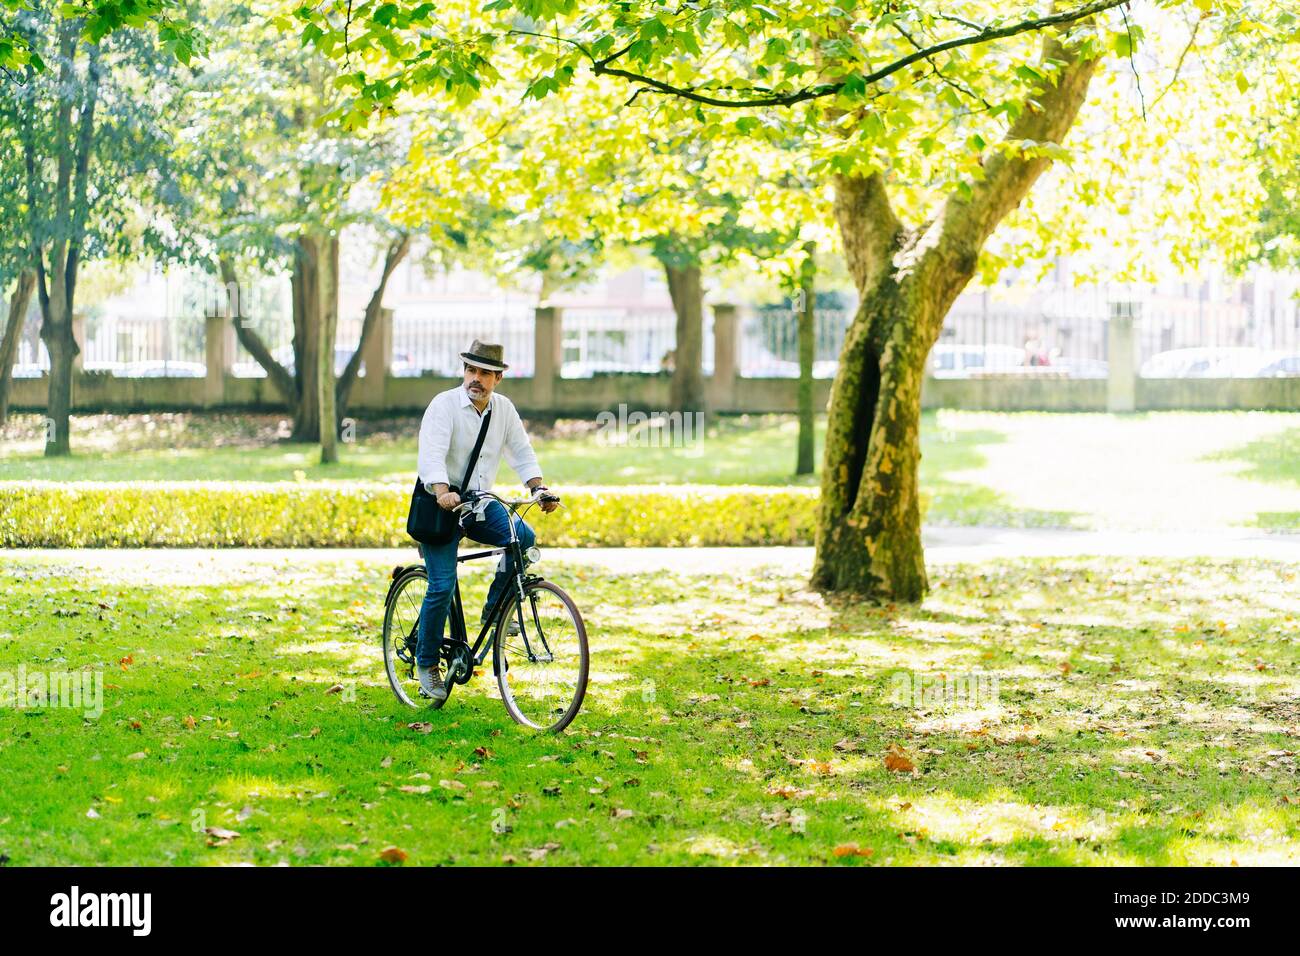 Mature man cycling on grass in park during sunny day Stock Photo